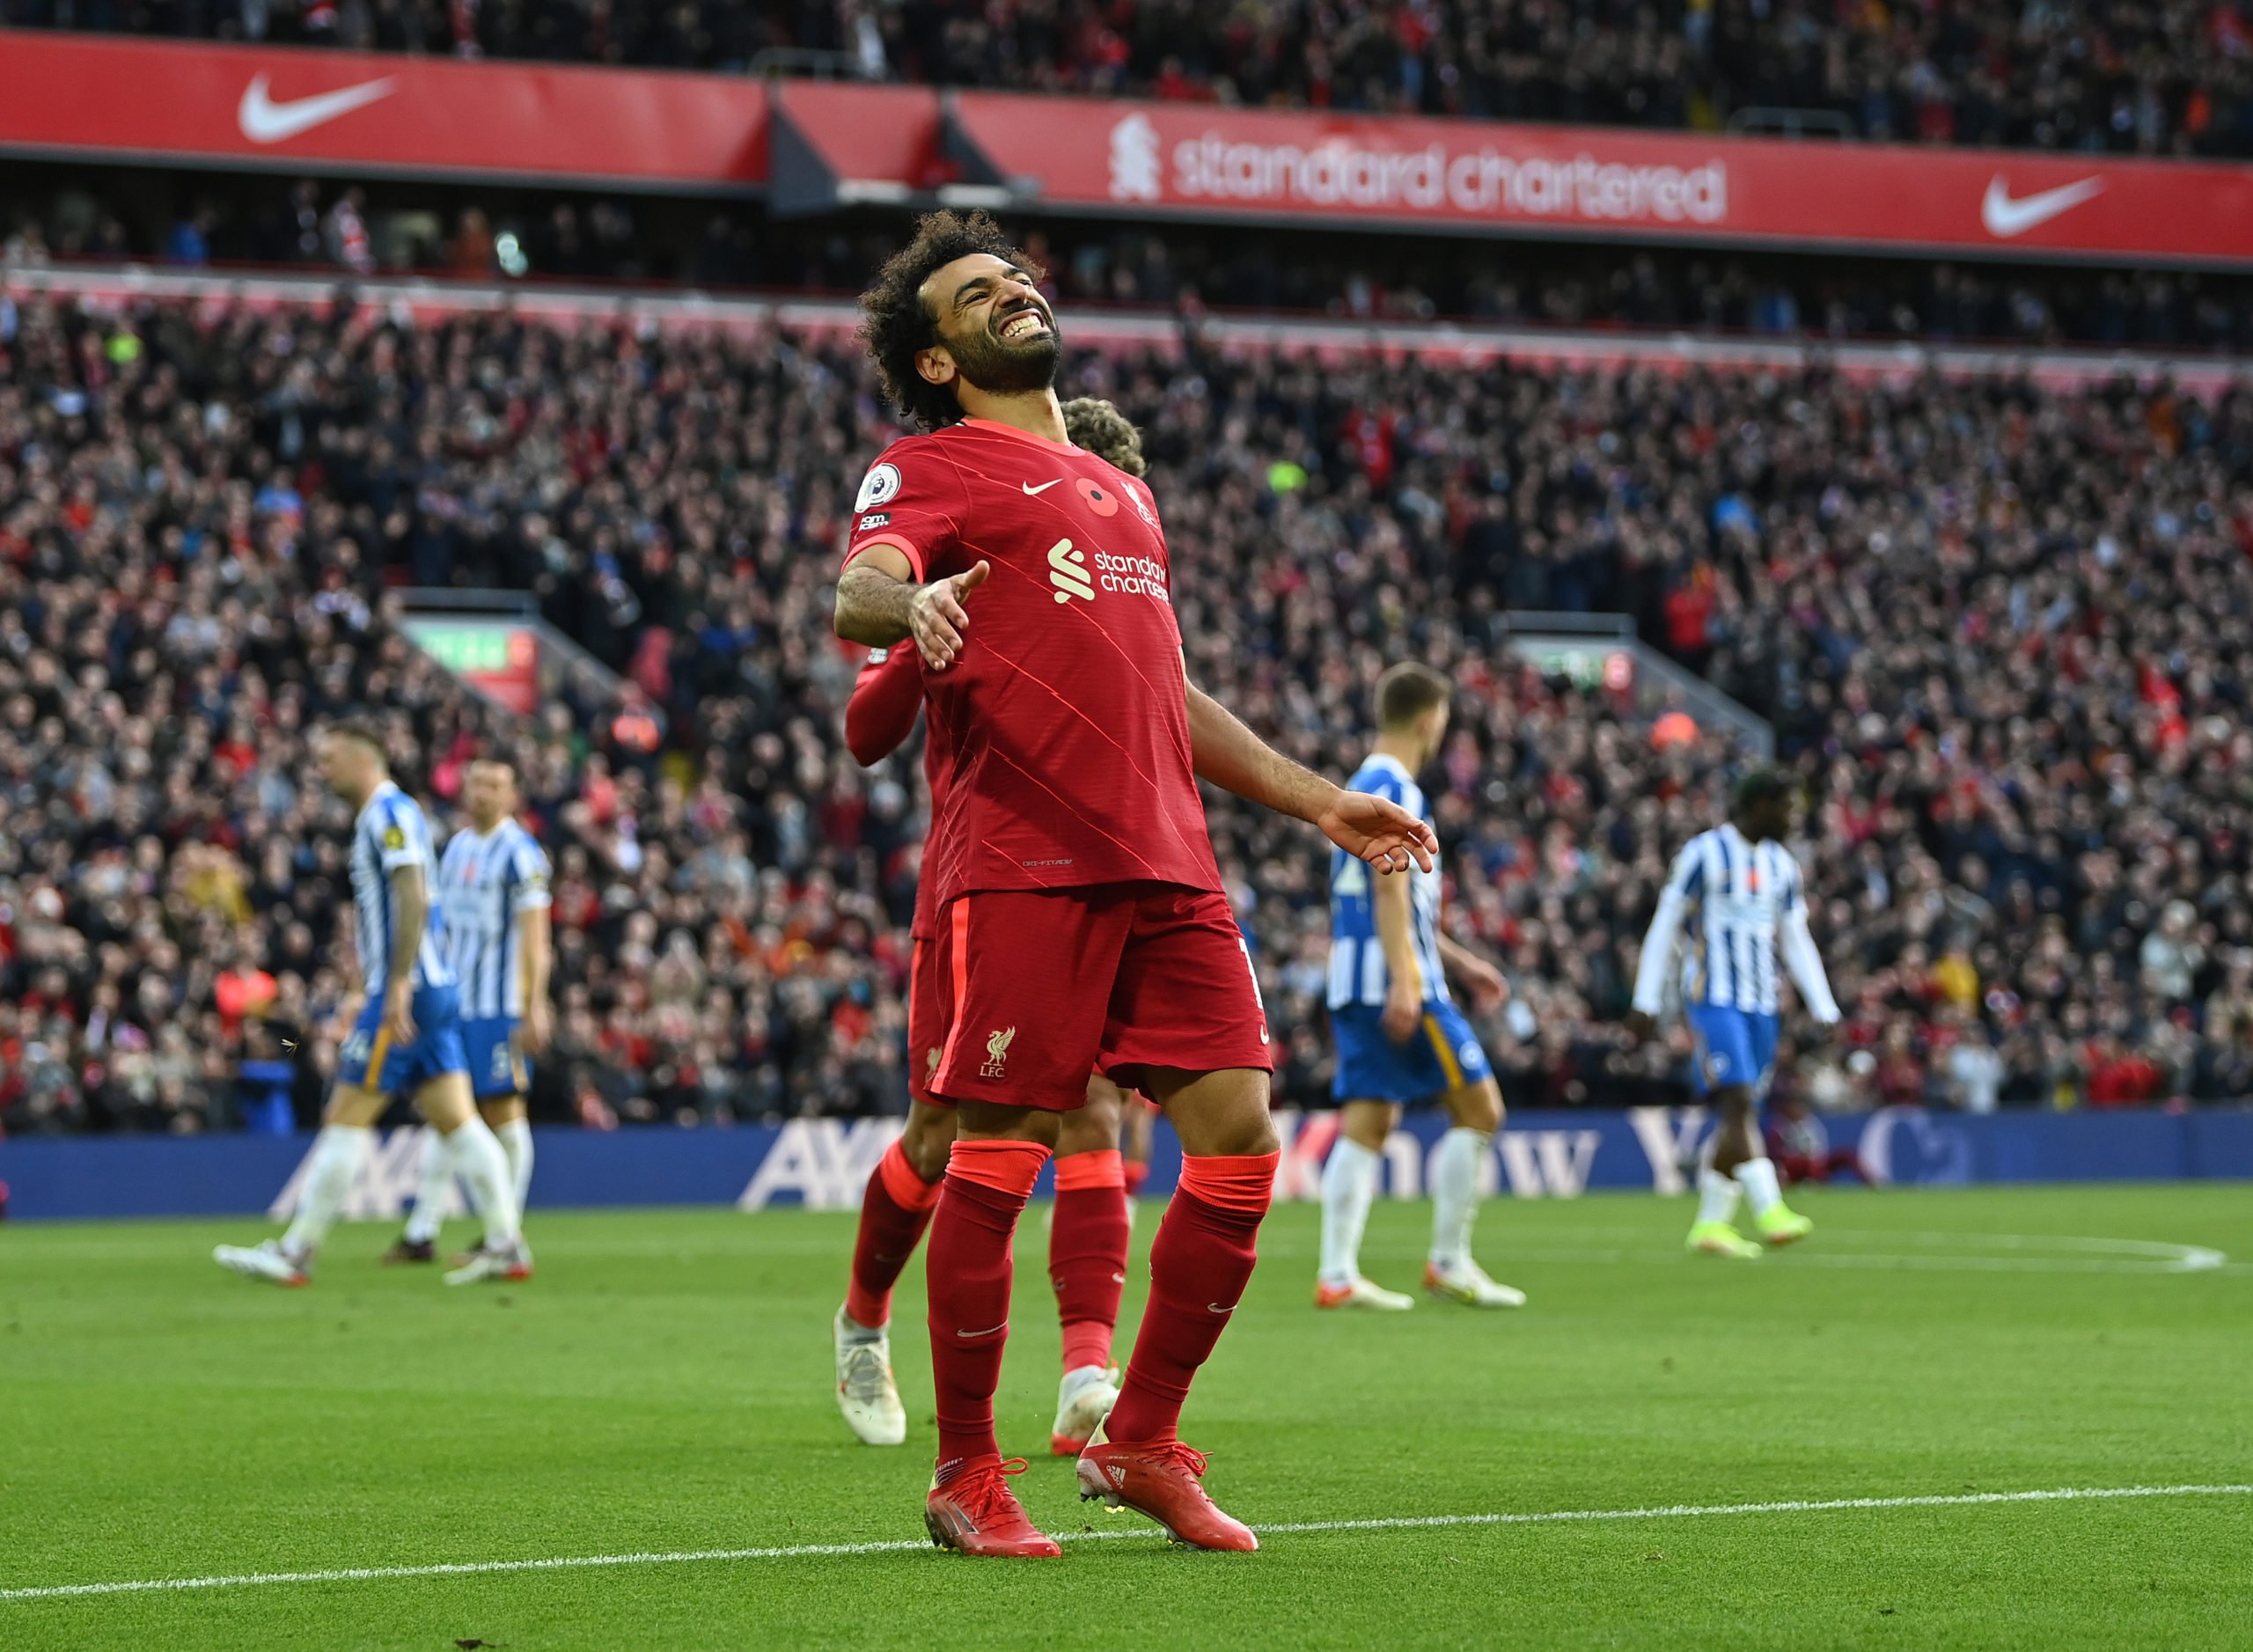 LIVERPOOL, ENGLAND - OCTOBER 30:  Mohamed Salah of Liverpool reacts after having a goal disallowed during the Premier League match between Liverpool and Brighton & Hove Albion at Anfield on October 30, 2021 in Liverpool, England. (Photo by Shaun Botterill/Getty Images)
The 4th Official uses images provided by the following image agency: Getty Images (https://www.gettyimages.de/)
Imago Images (https://www.imago-images.de/)